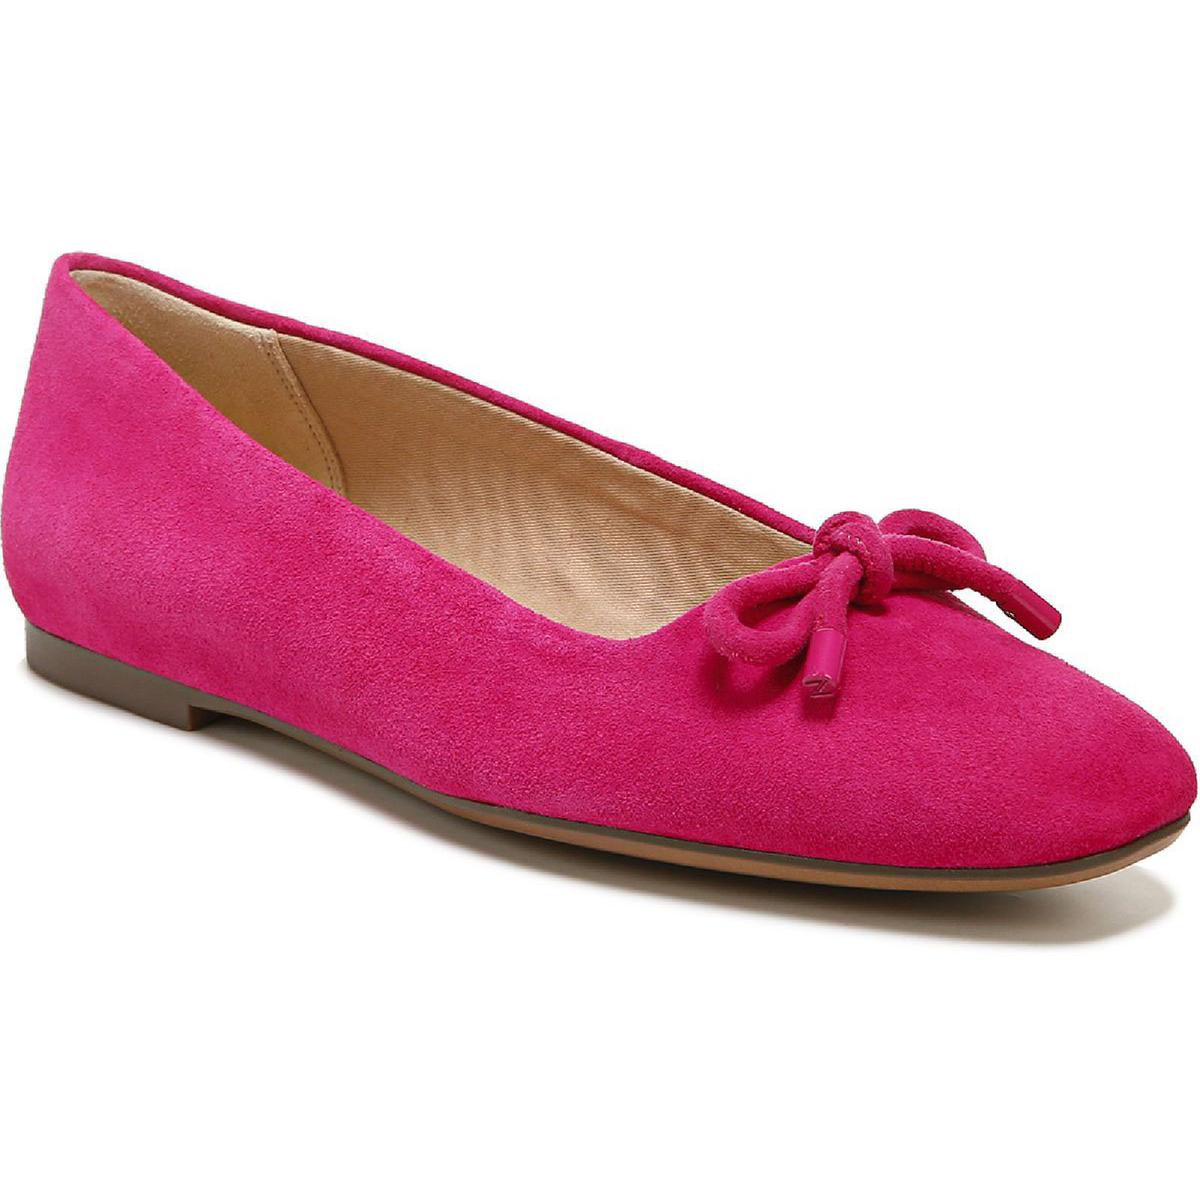 Naturalizer Poetic Womens Bow Square Toe Ballet Flats